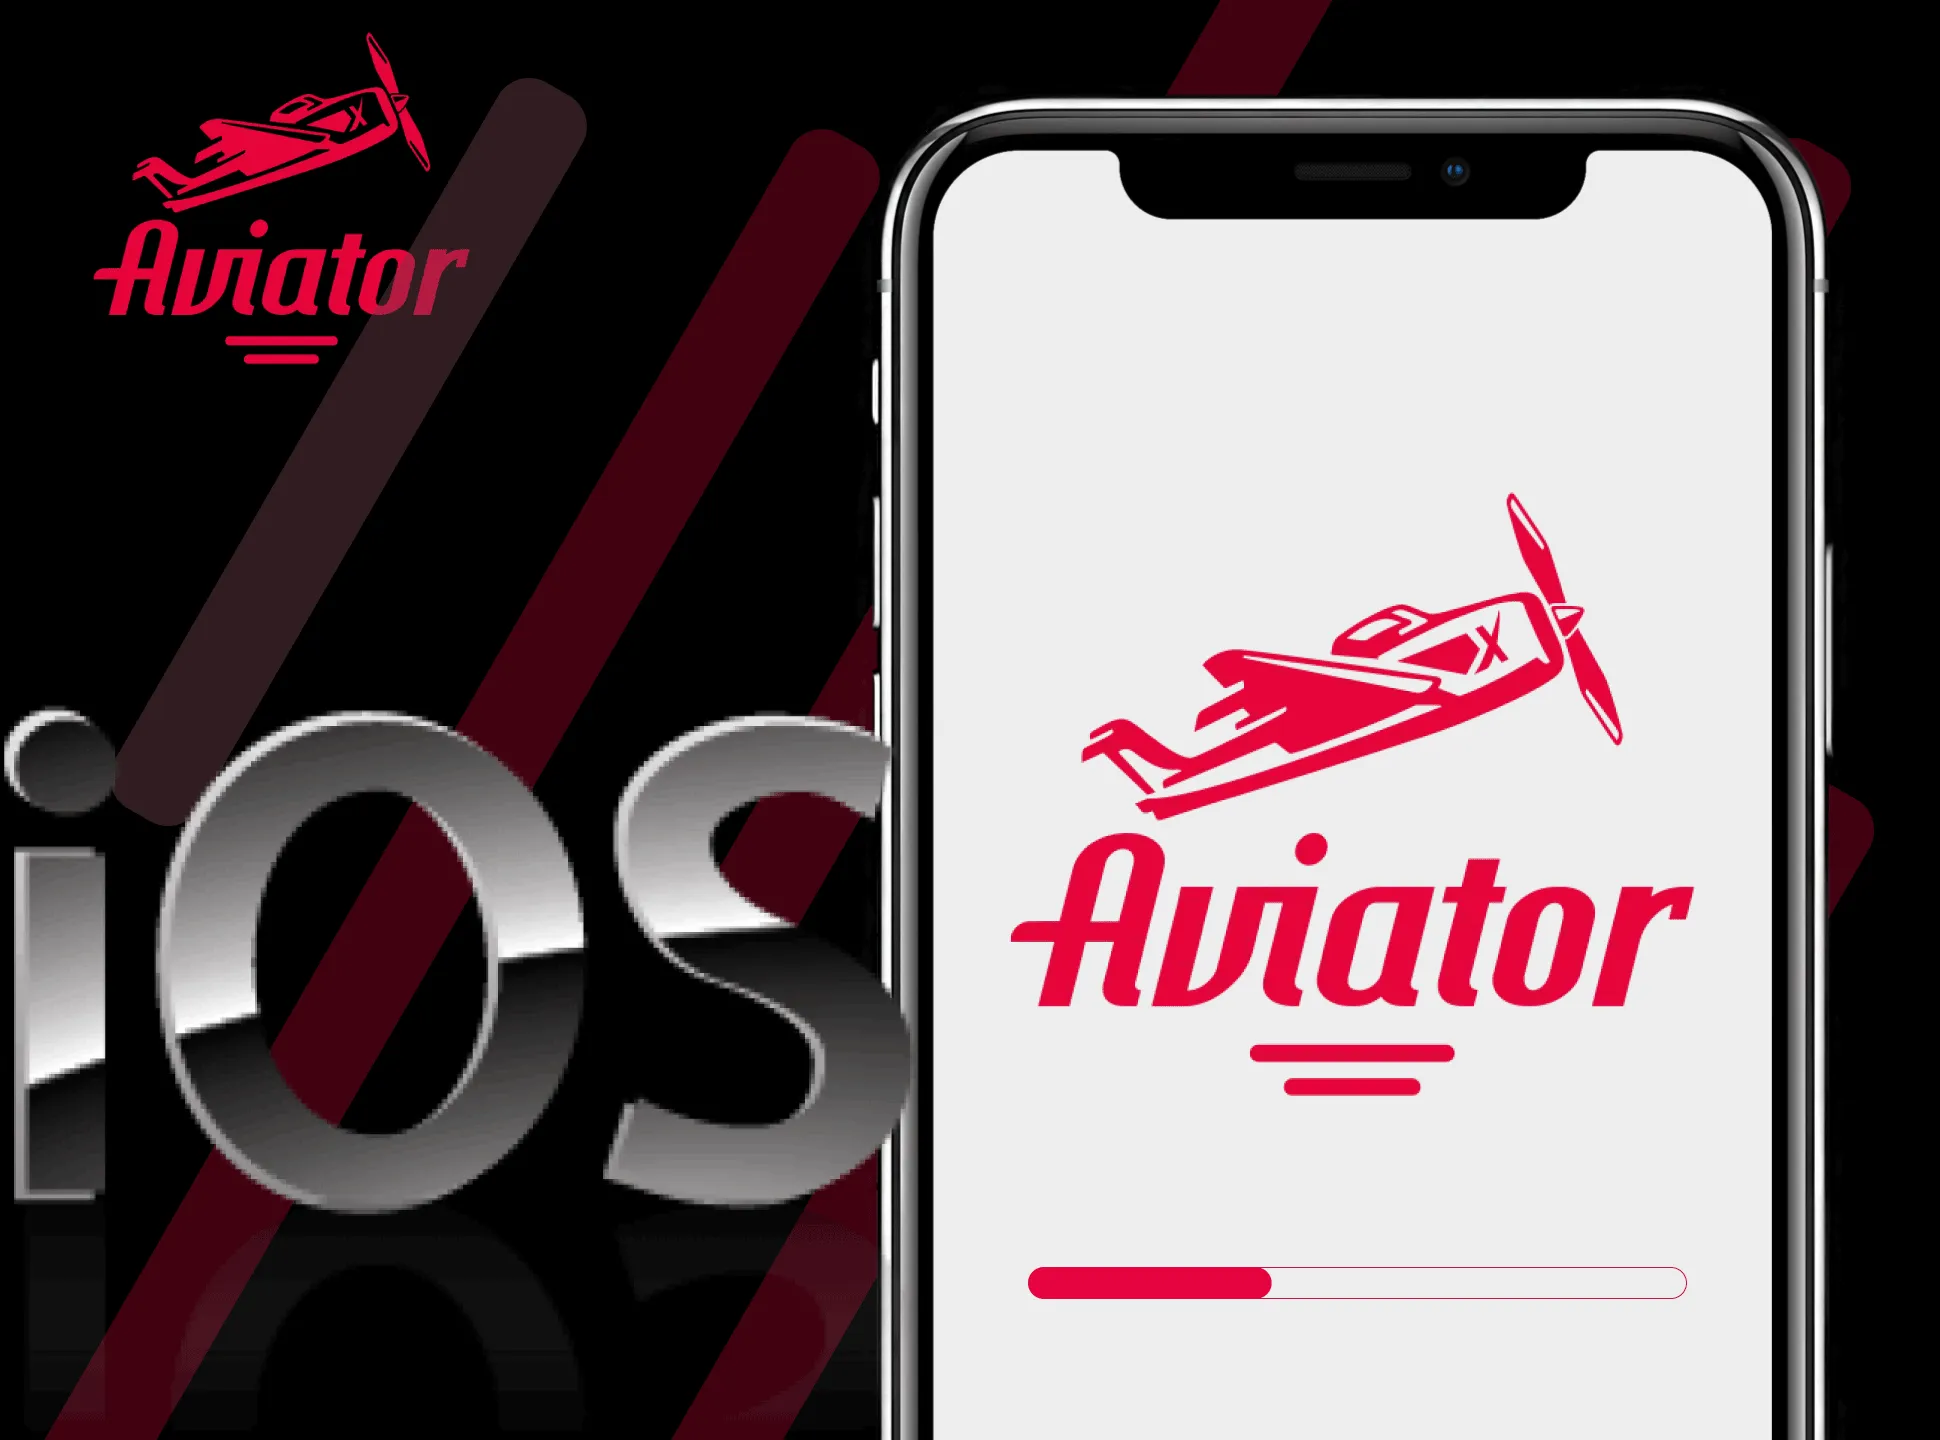 Download the mobile casino on your iPhone to play Aviator.